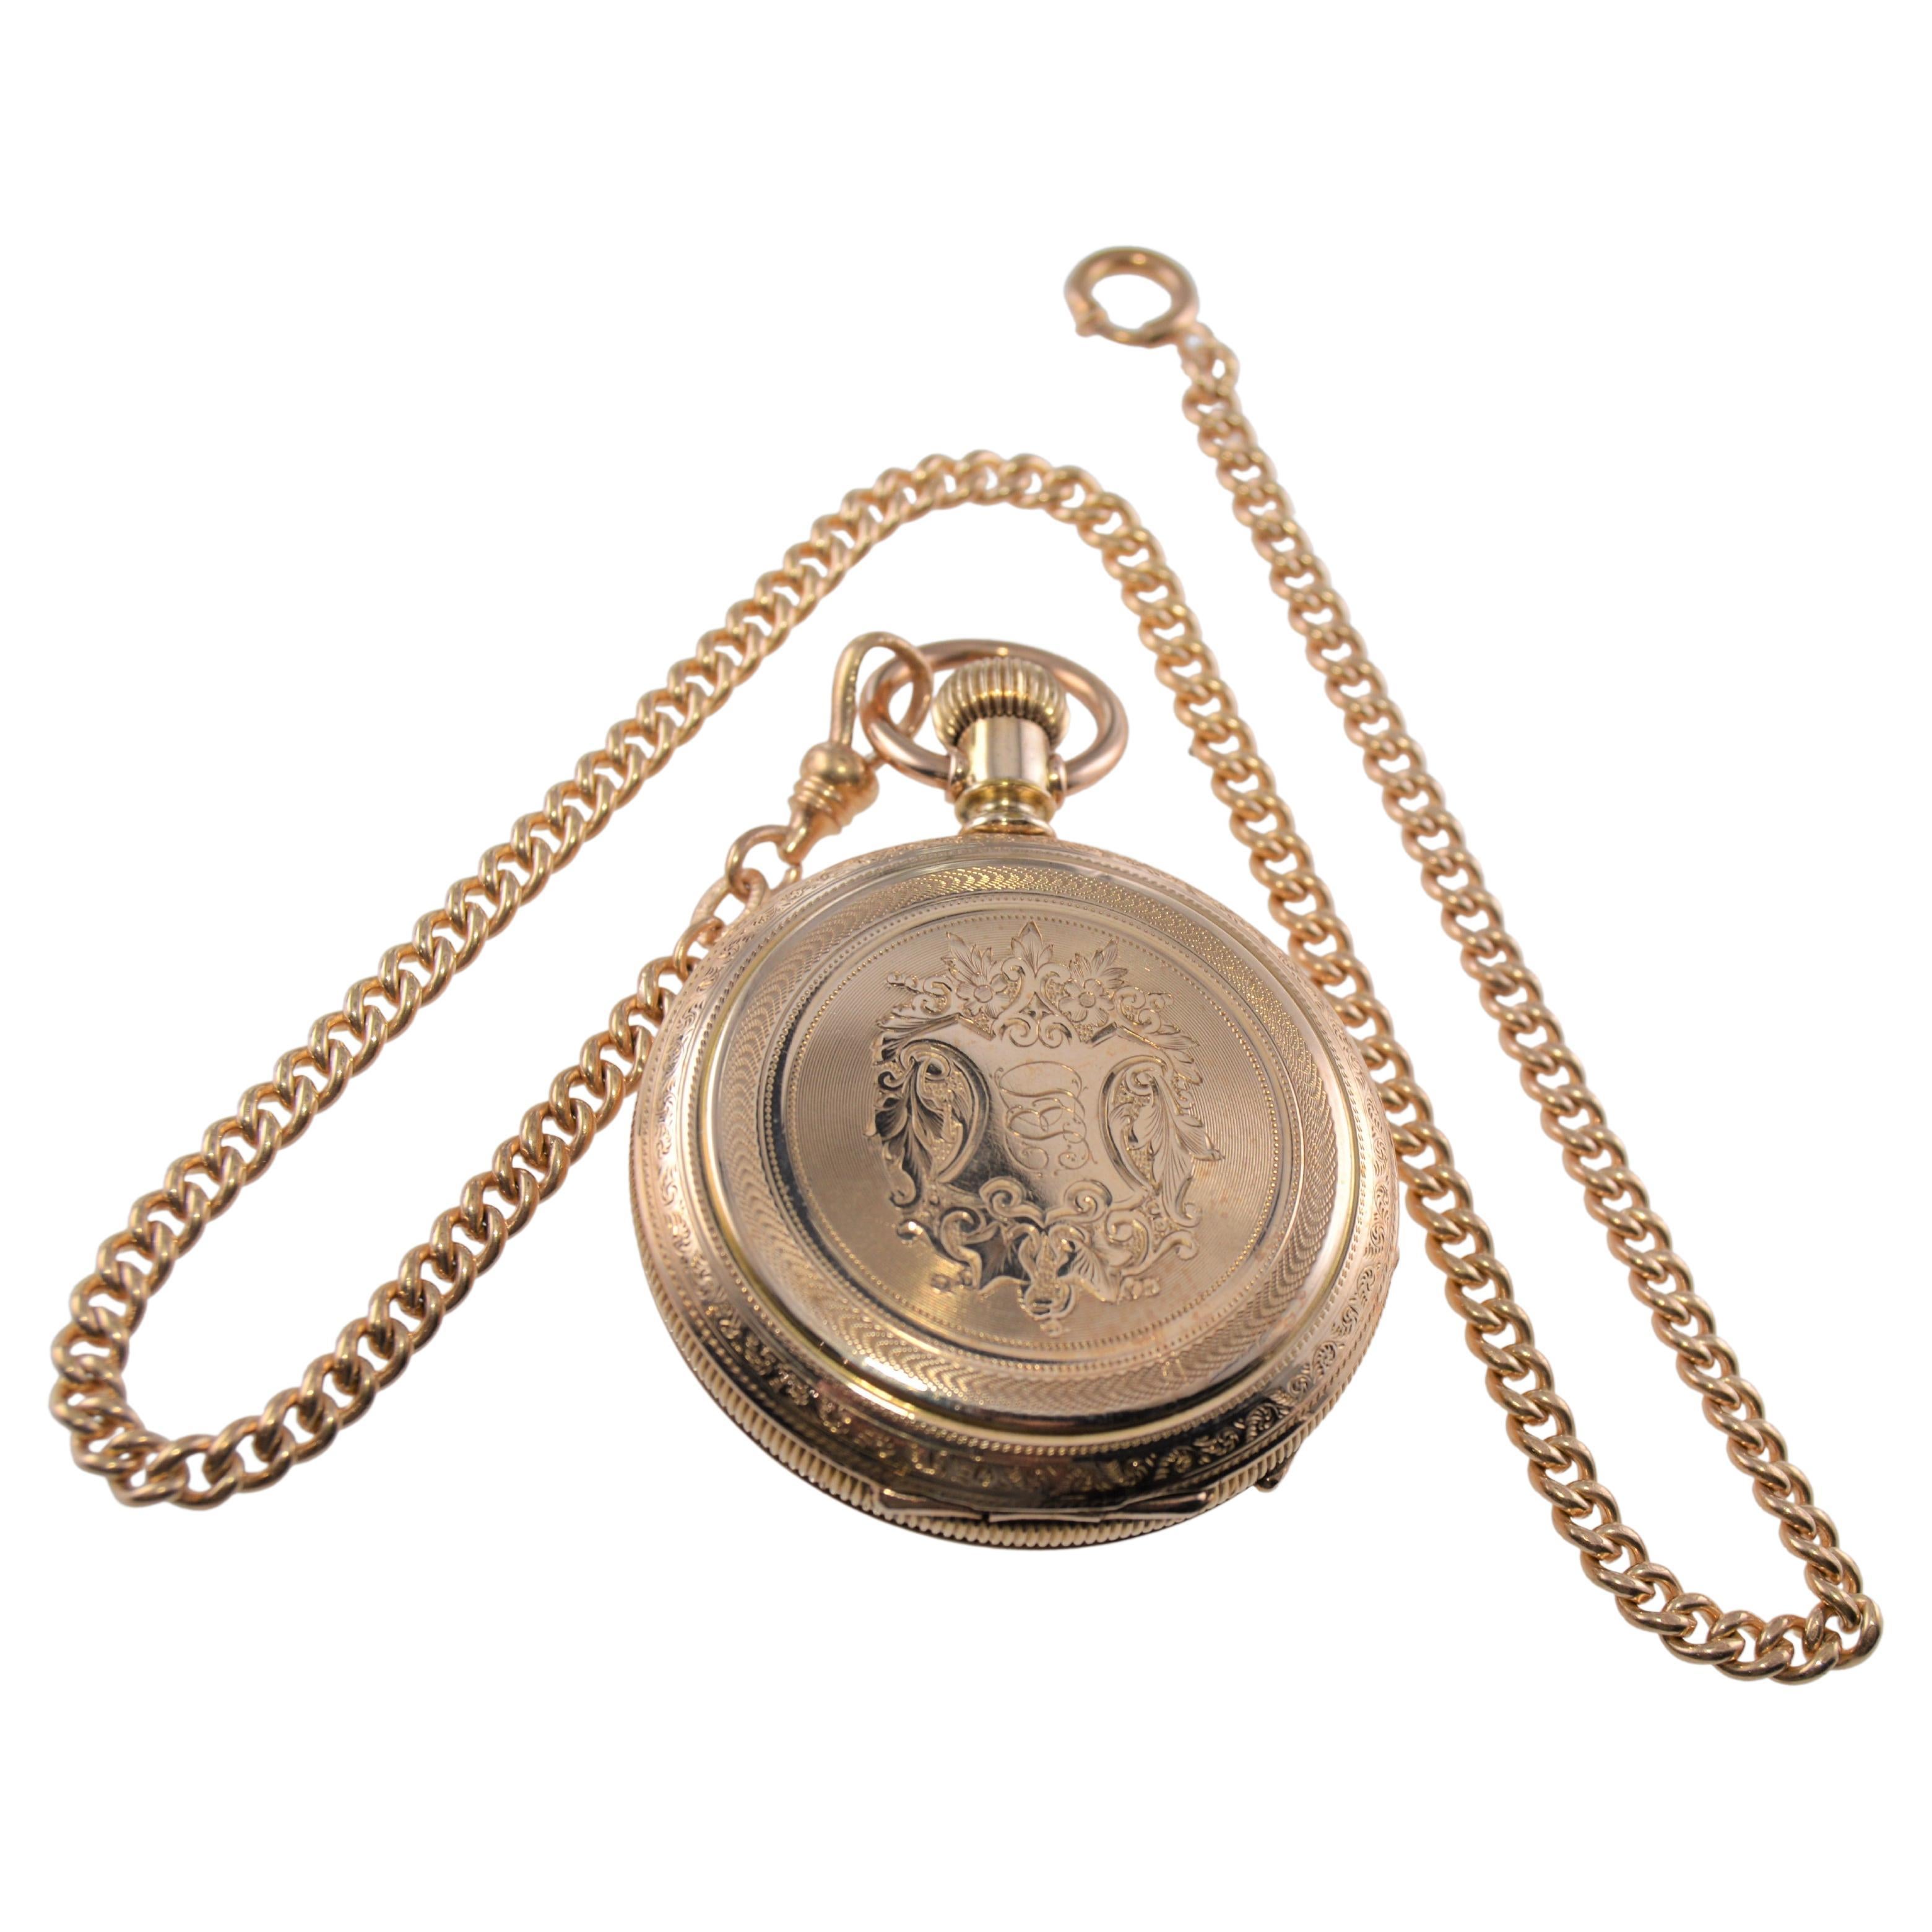 Elgin Gold Filled Hunters Case Pocket Watch from 1900 with Kiln Fired Dial For Sale